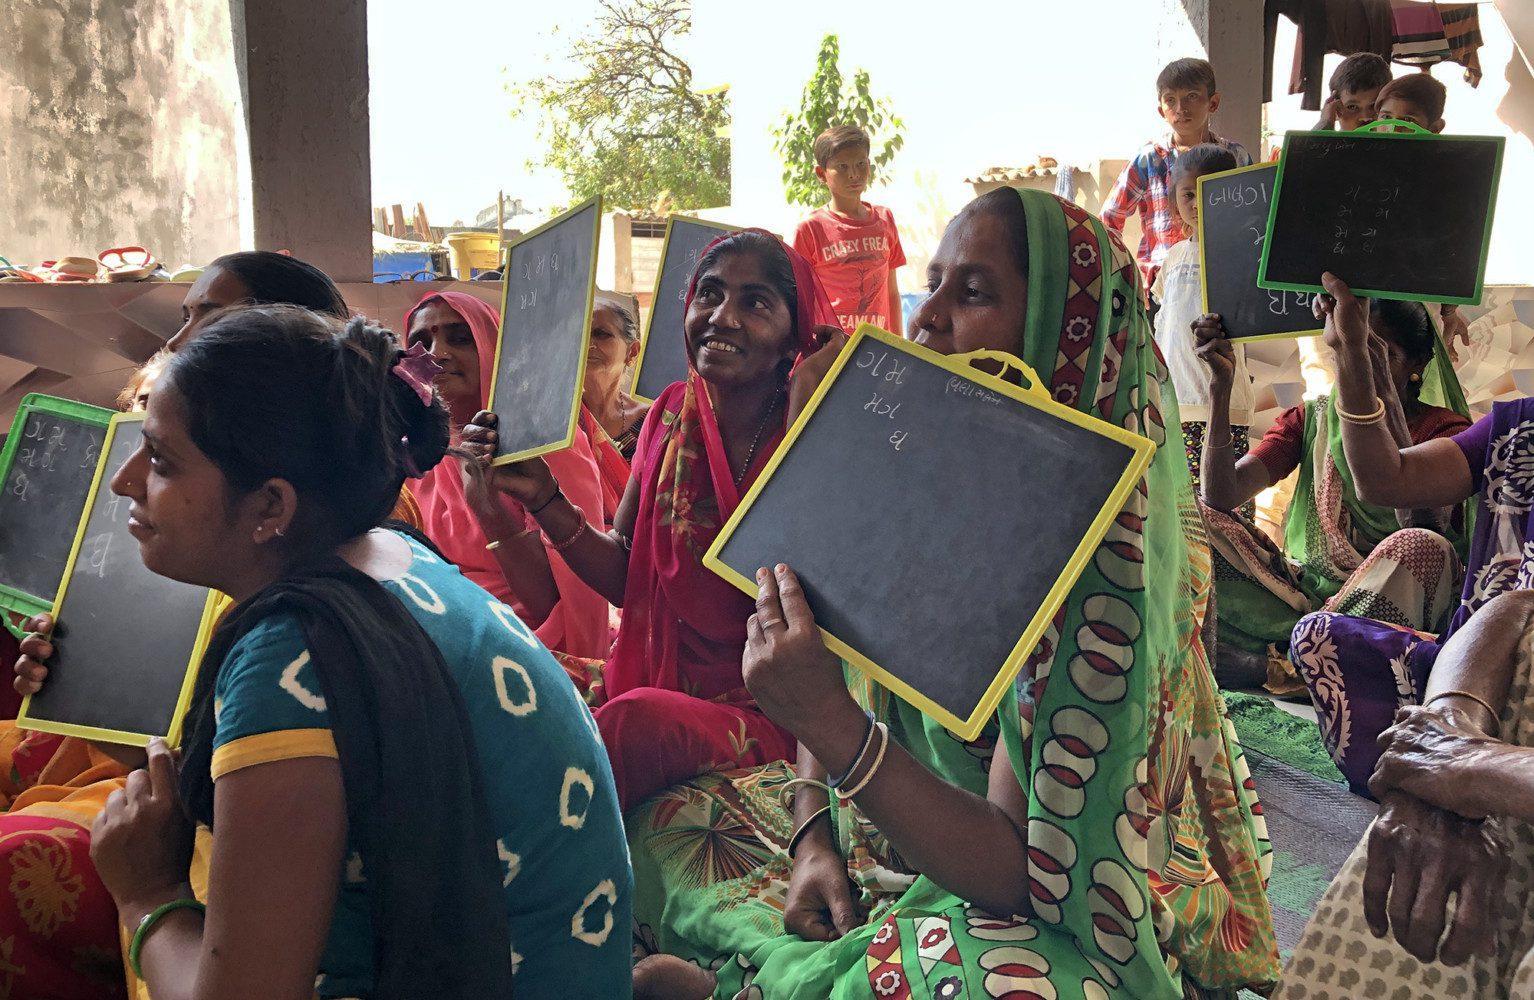 Women in India hold up small chalkboards